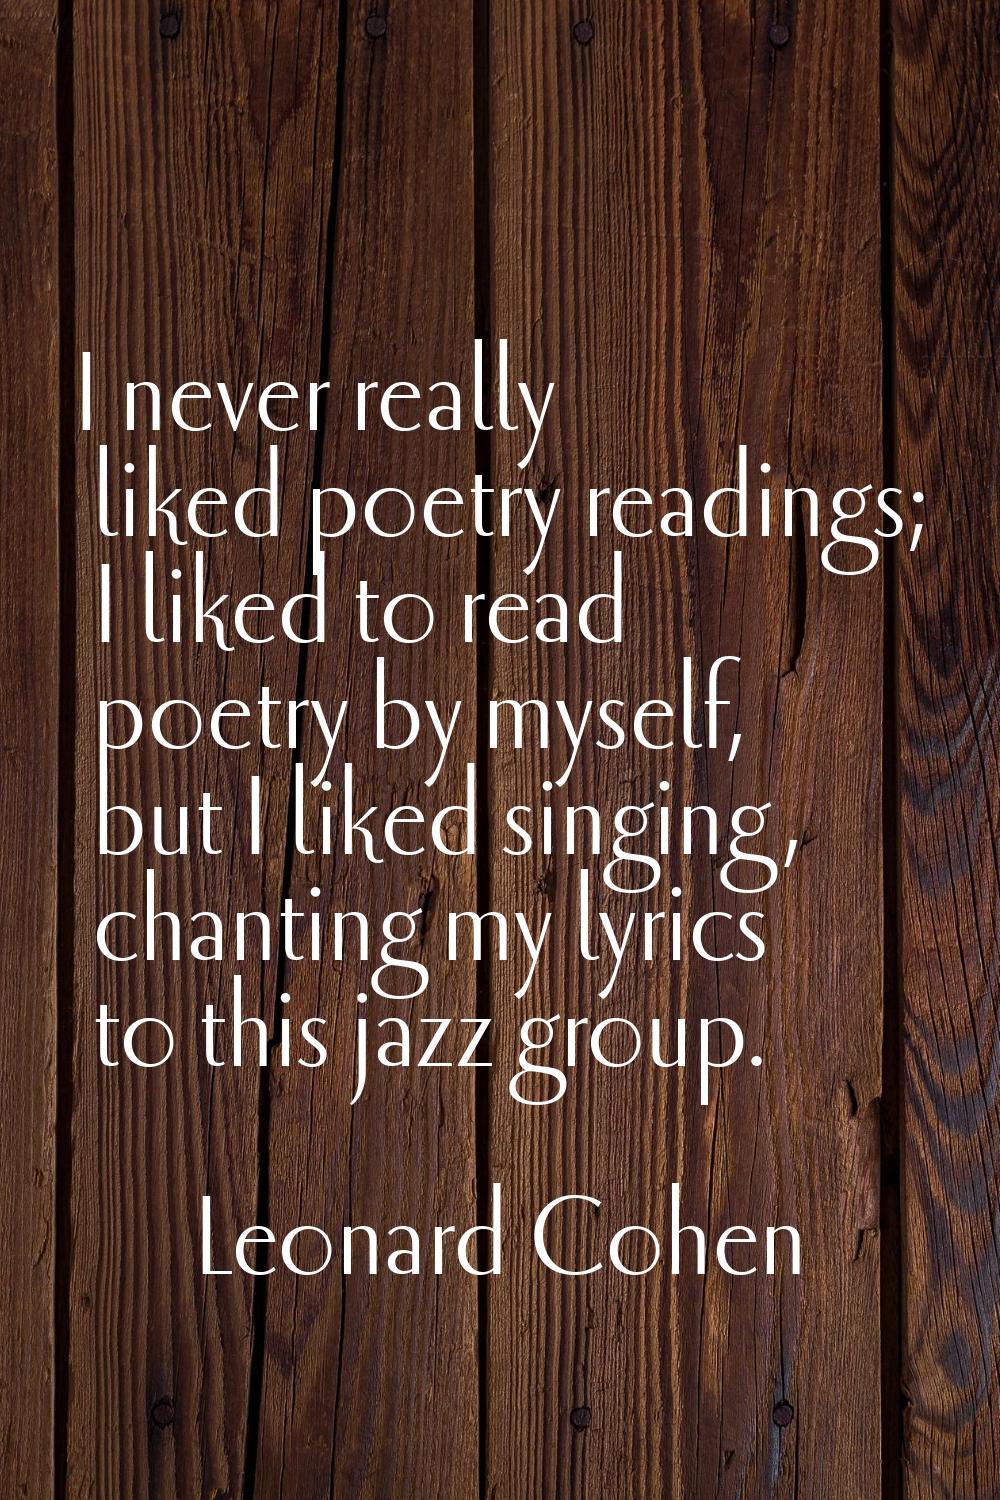 I never really liked poetry readings; I liked to read poetry by myself, but I liked singing, chanti